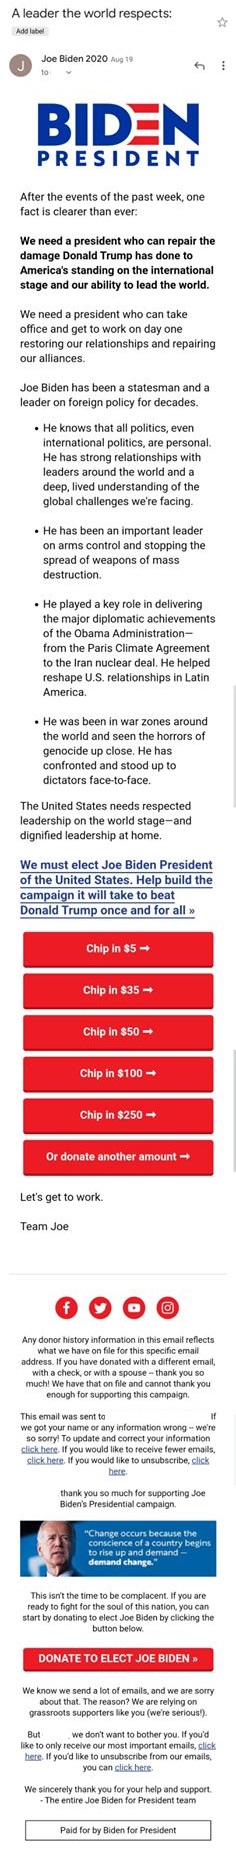 Joe Biden's marketing team sparks emotion with their email subject line, playing to a community that’s preparing for the next presidential election.